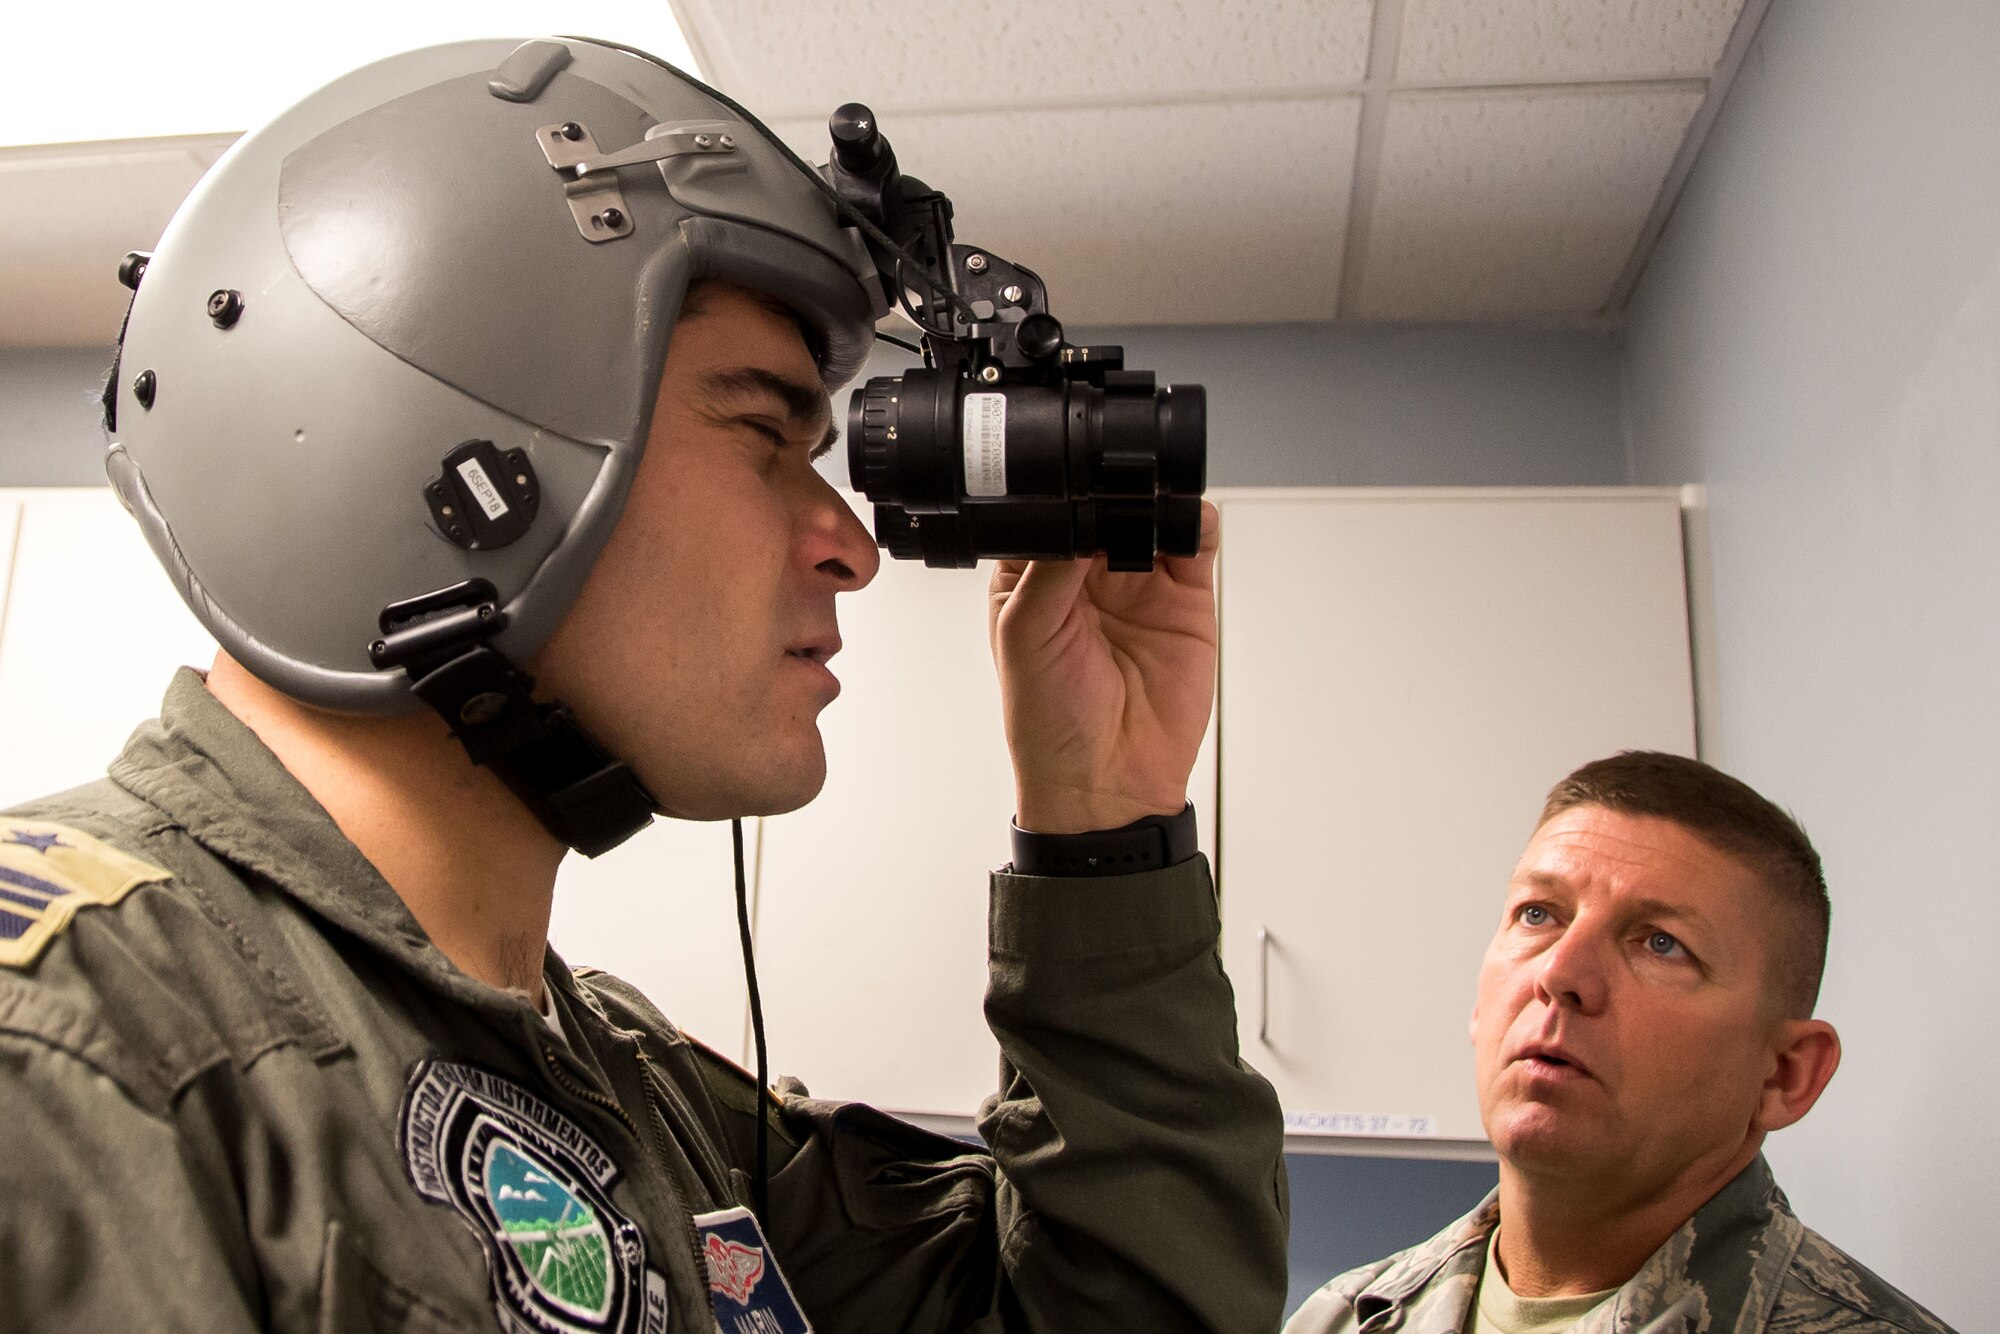 Chilean Air Force Maj. F. Marin, a C-130 pilot with the N10 Squadron, lines up the lenses on night vision goggles July 24, 2018, at Naval Air Station Fort Worth Joint Reserve Base, Texas. Marin visited the wing as part of the State Partnership Program, which forges mutually beneficial partnerships with some of the 136th Airlift Wing’s staunchest allies and partners worldwide.